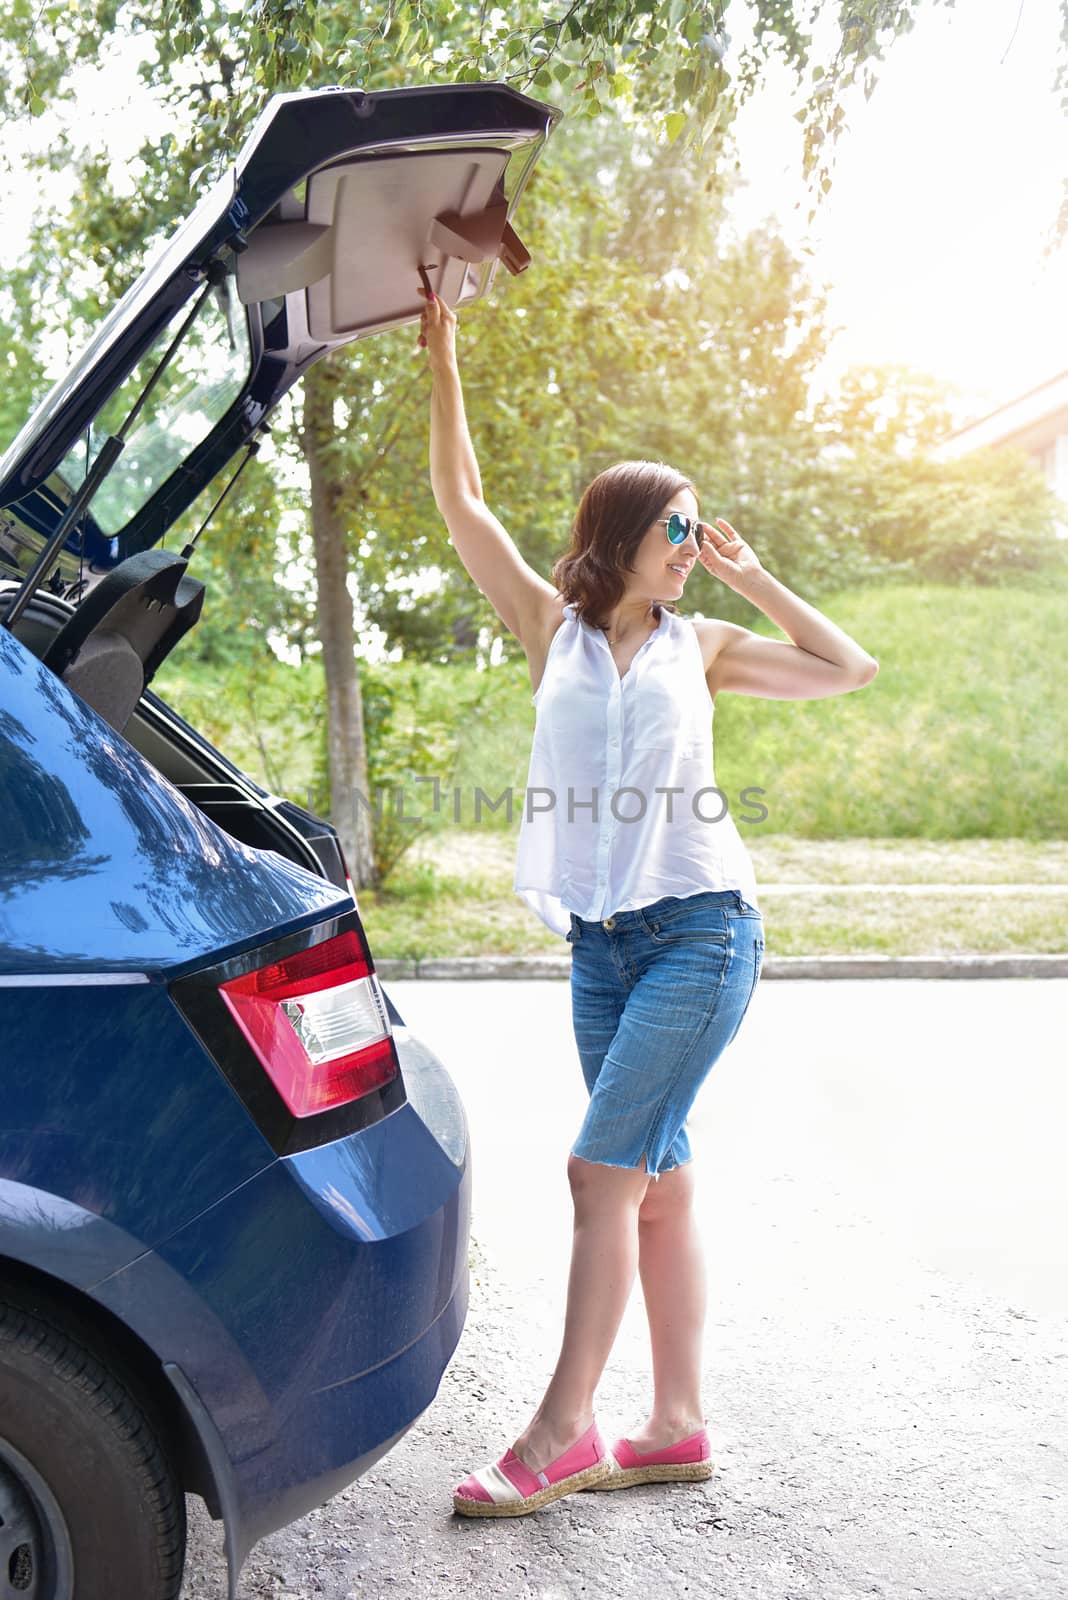 Smiling Caucasian woman in a white blouse and denim shorts putting her stuff bags into the car trunk